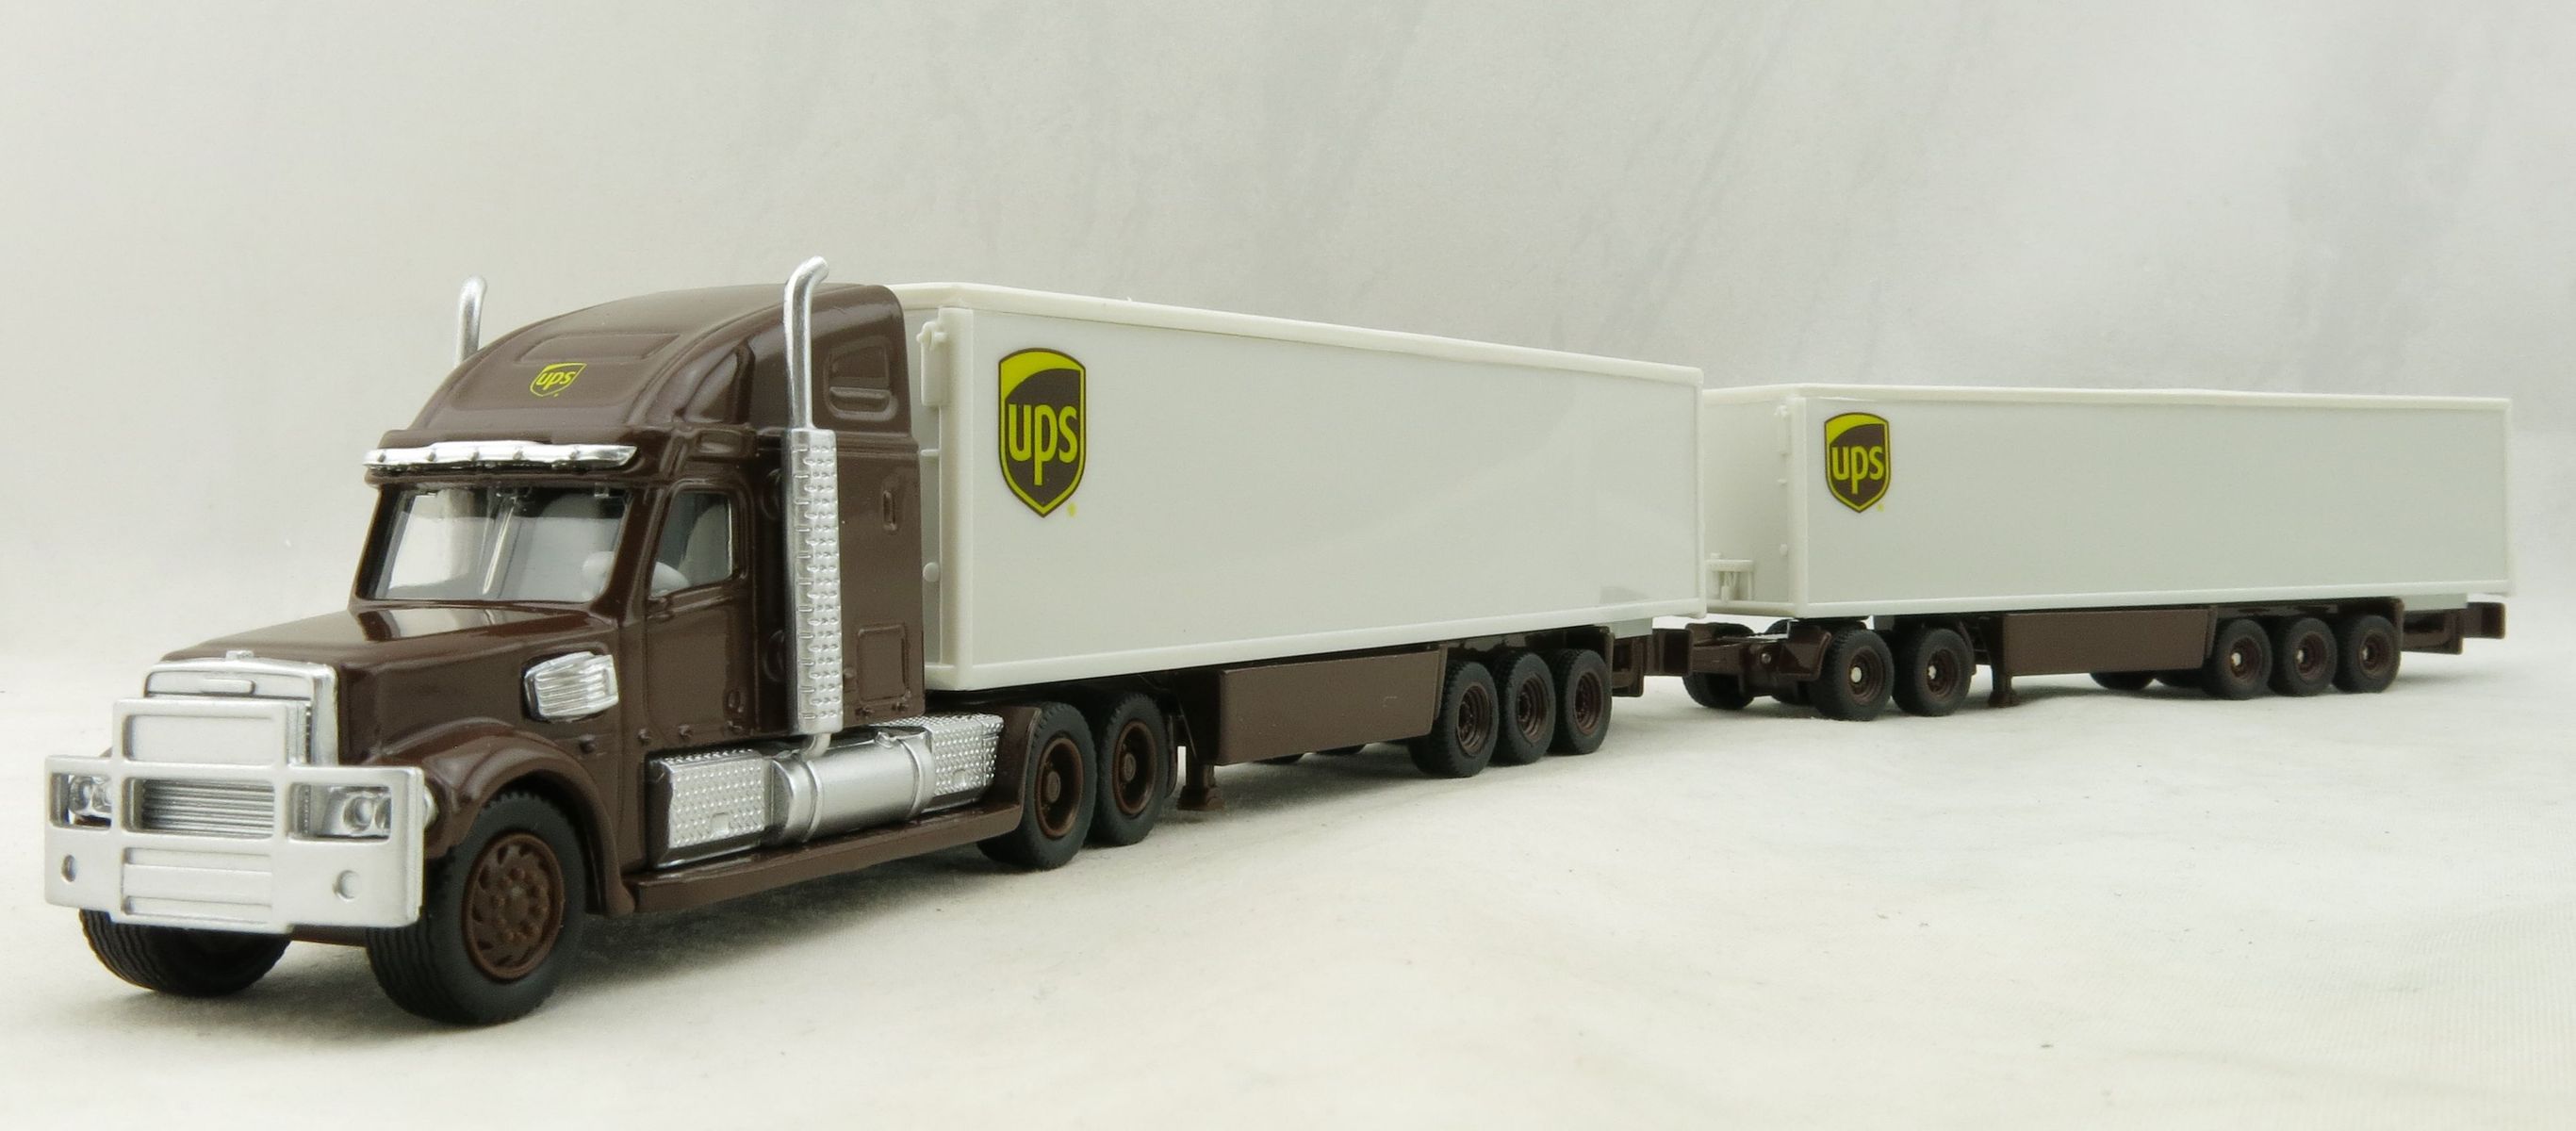 ups truck toys